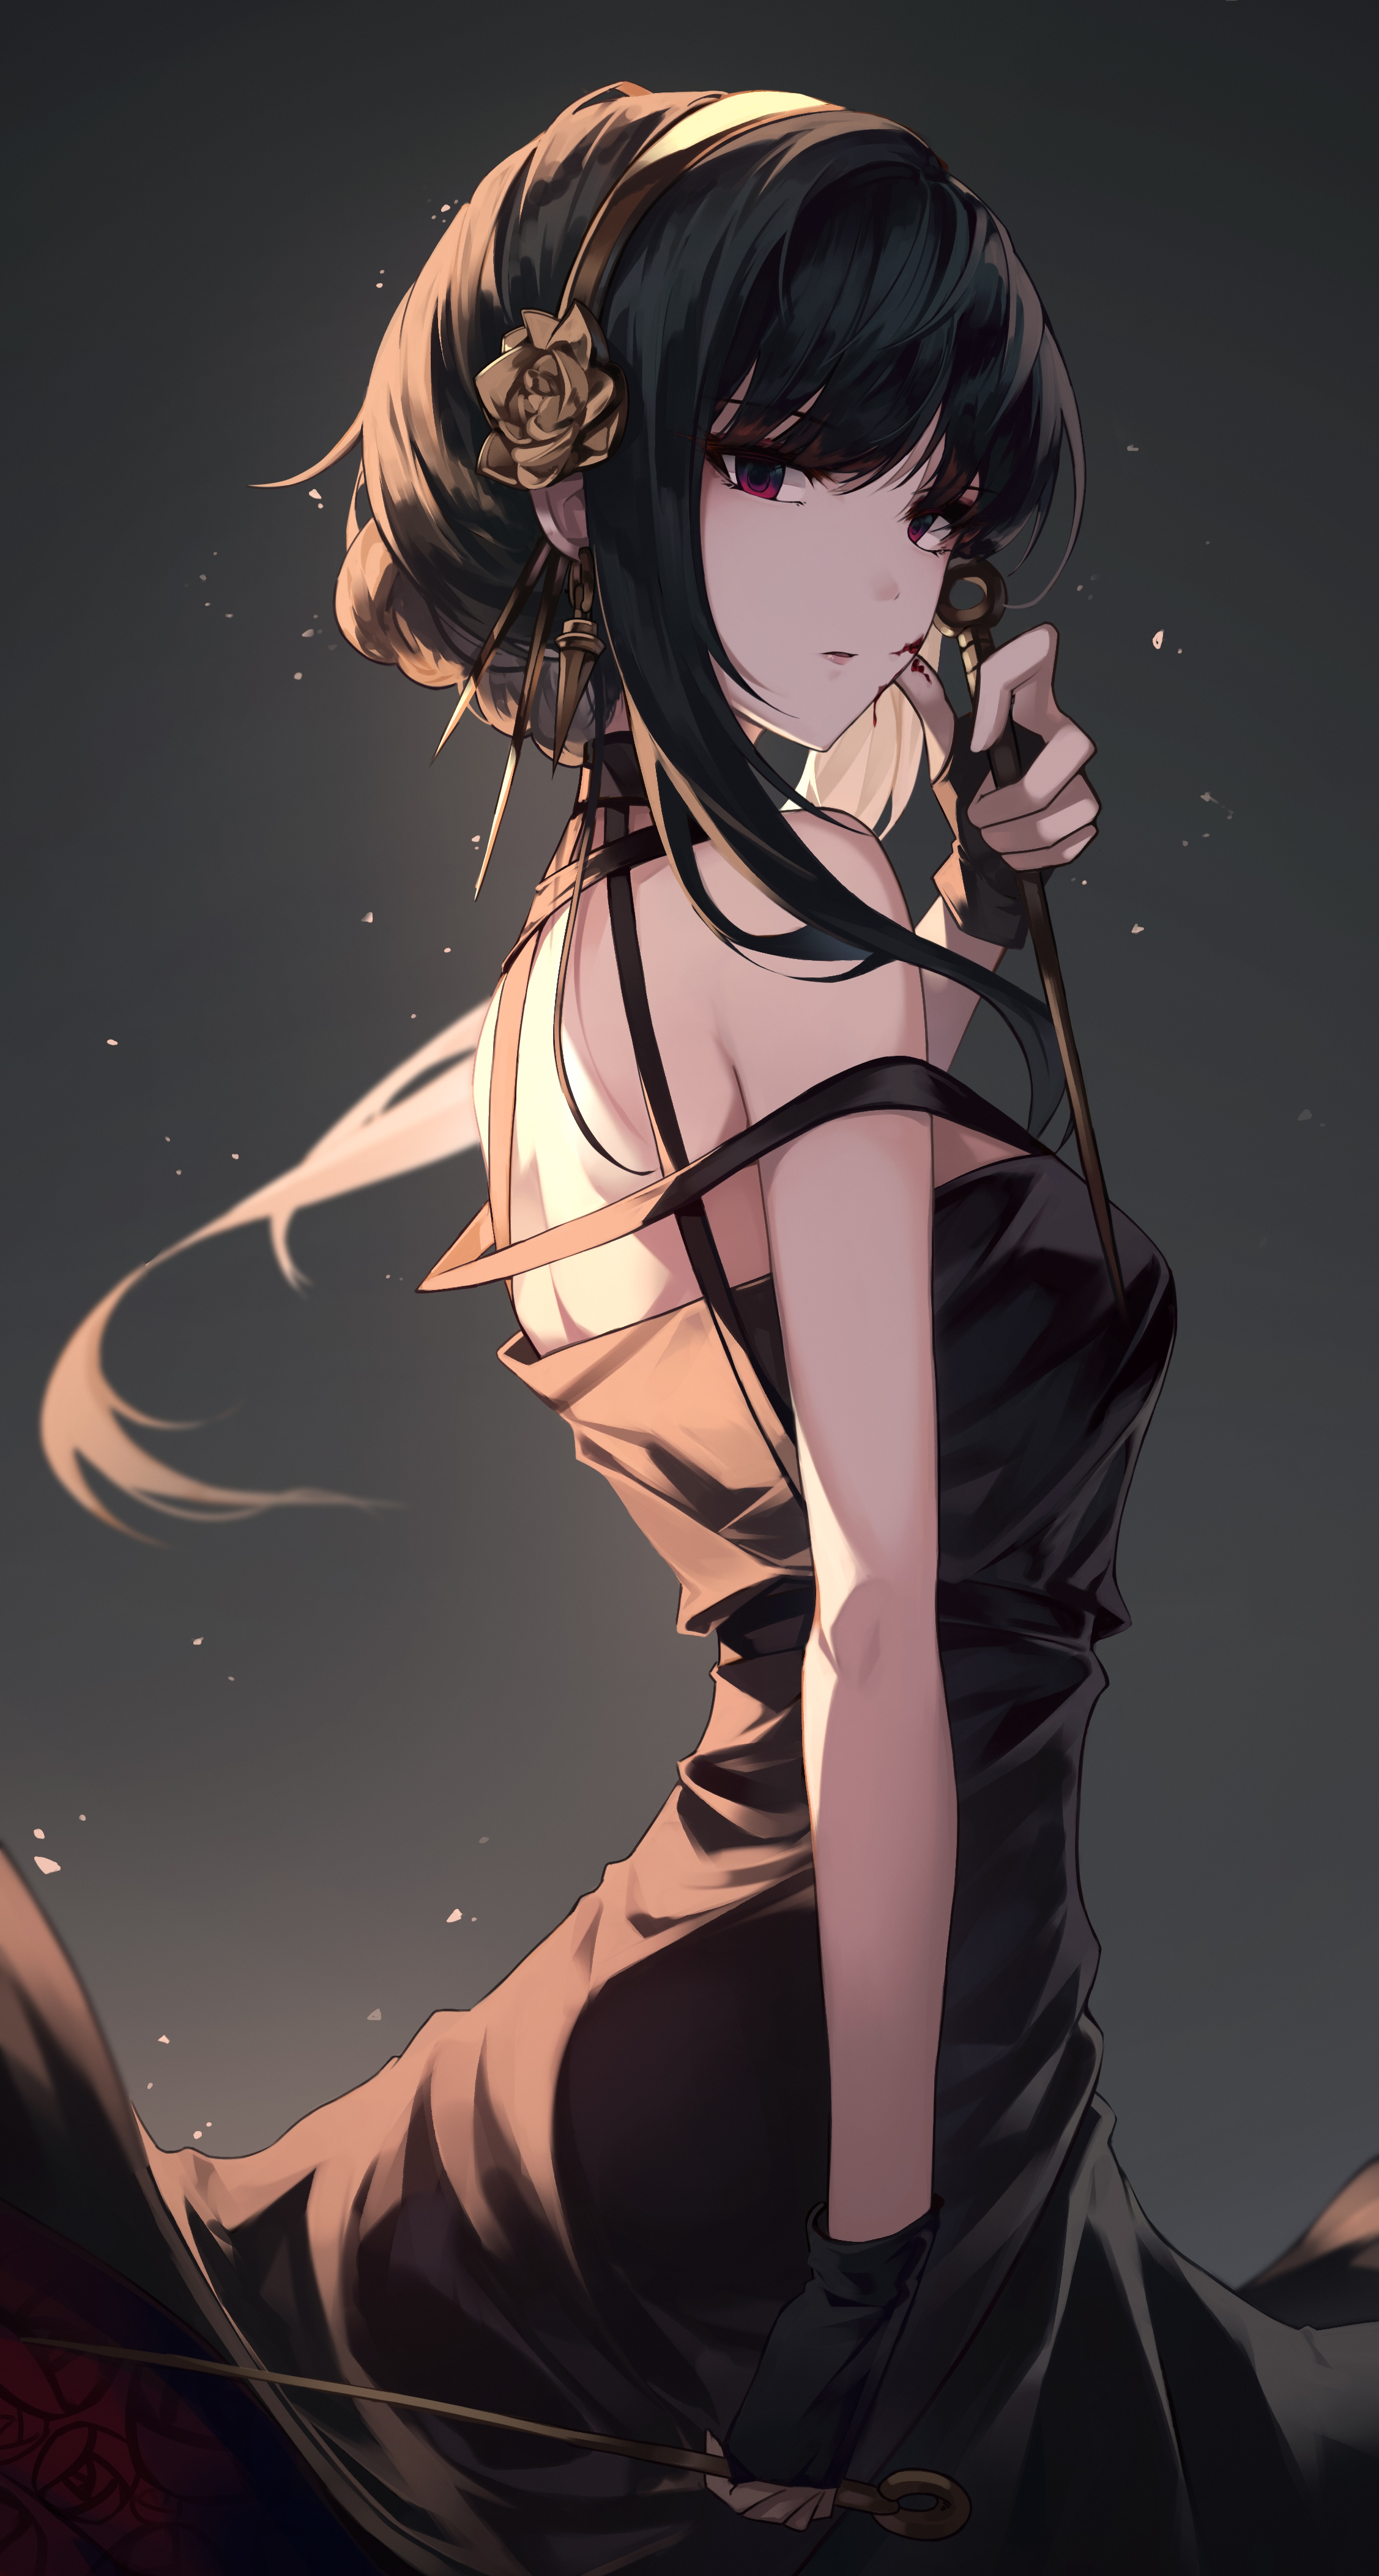 anime girl wearing a black dress, anime style, | Stable Diffusion | OpenArt